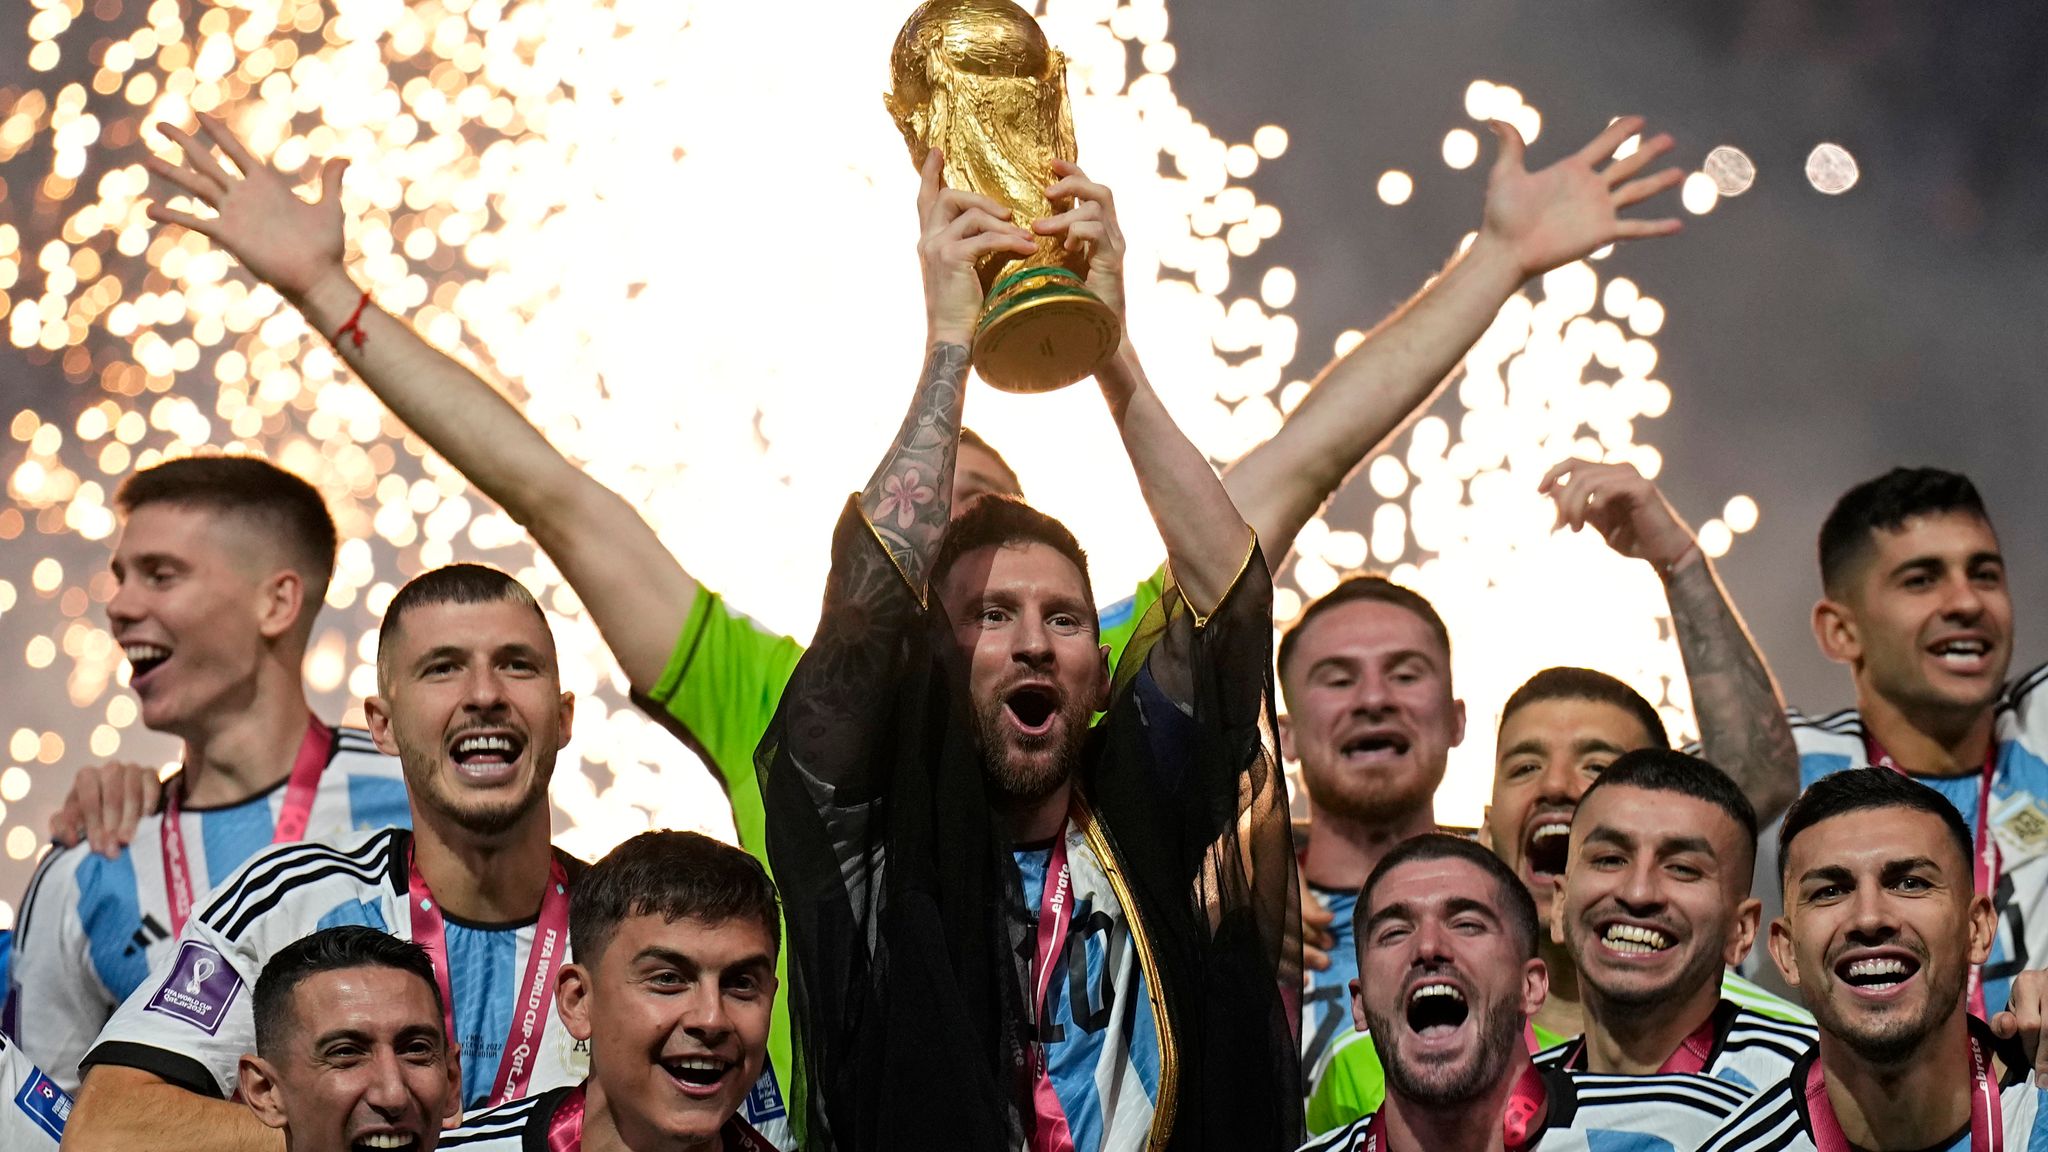 In what is already being hailed as one of the greatest finals in history, Argentina has won the World Cup following a thrilling encounter that saw them take the lead, lose it twice, and then win on penalties.